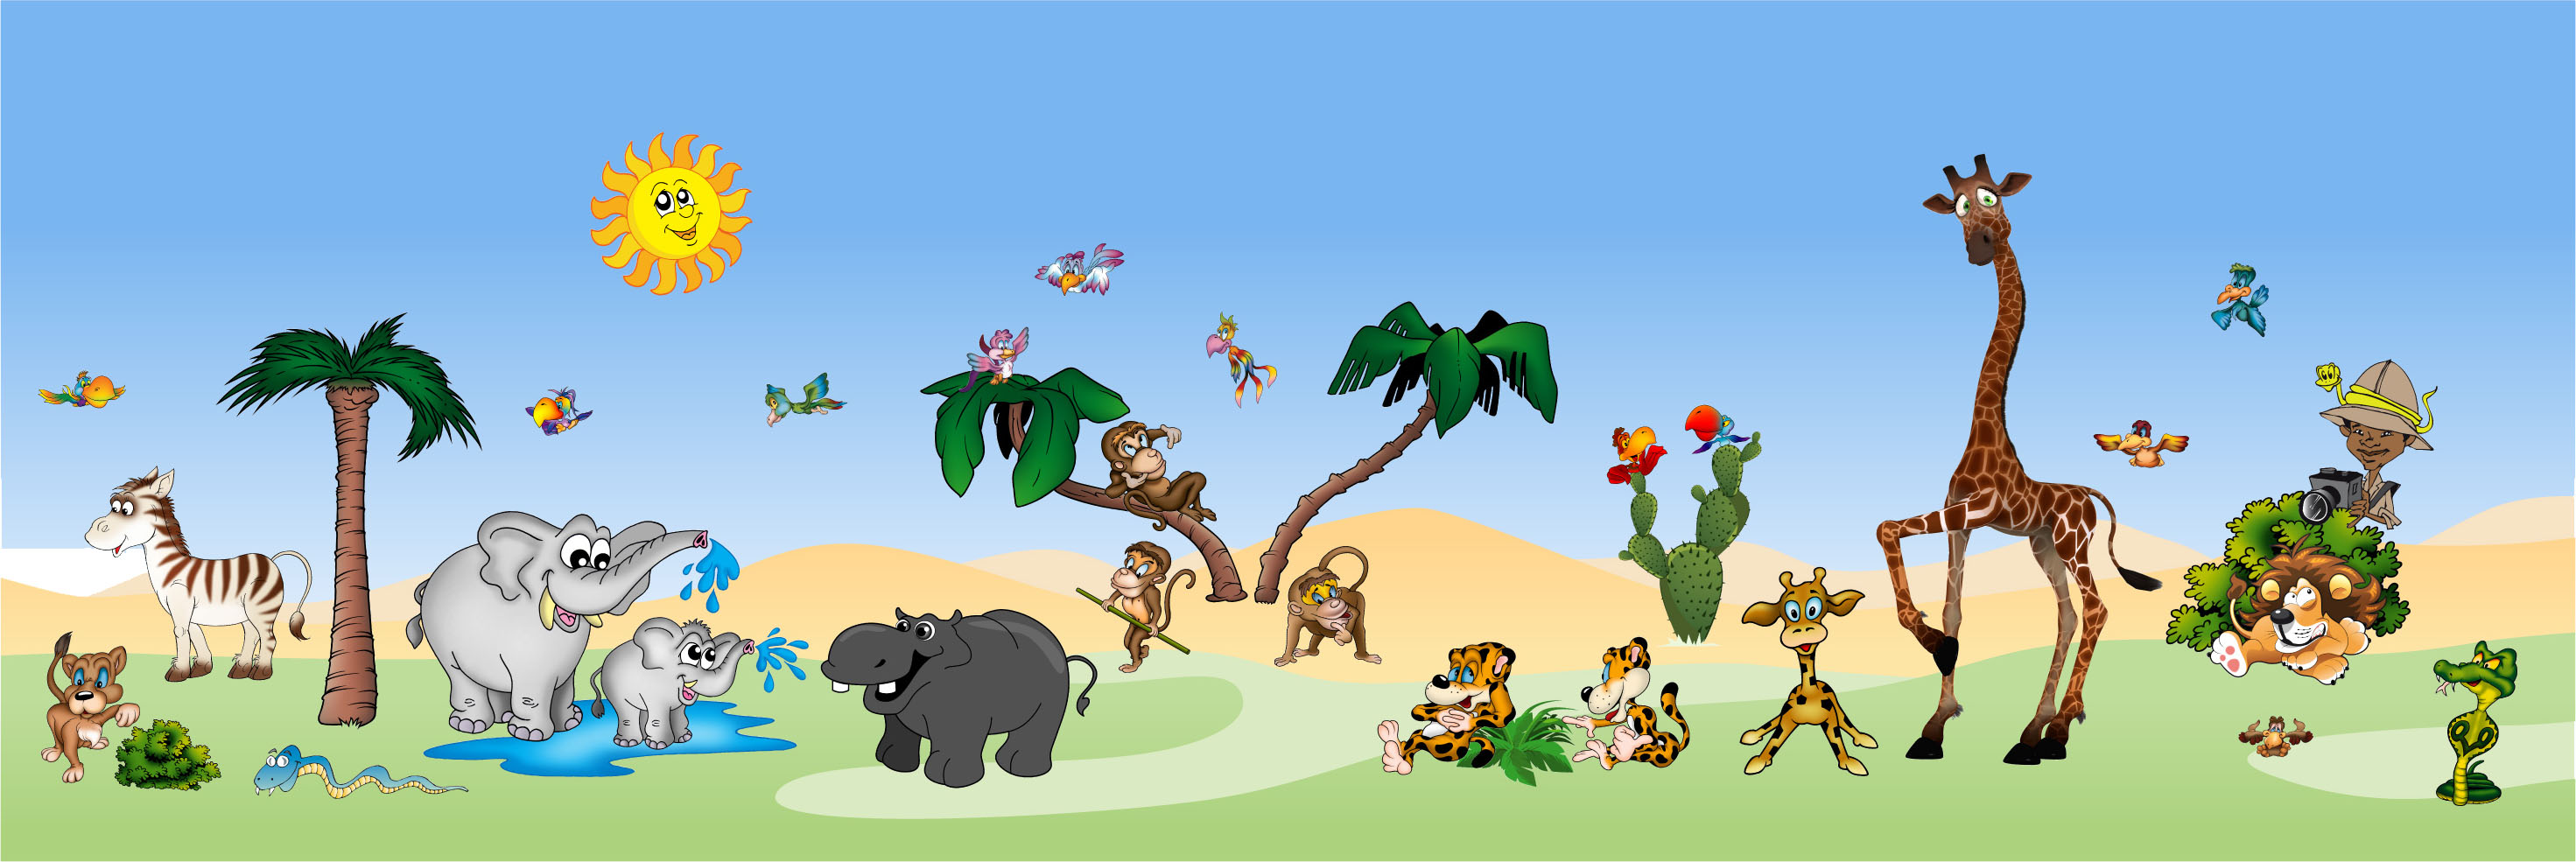 Images For - Jungle Animals For Kids.